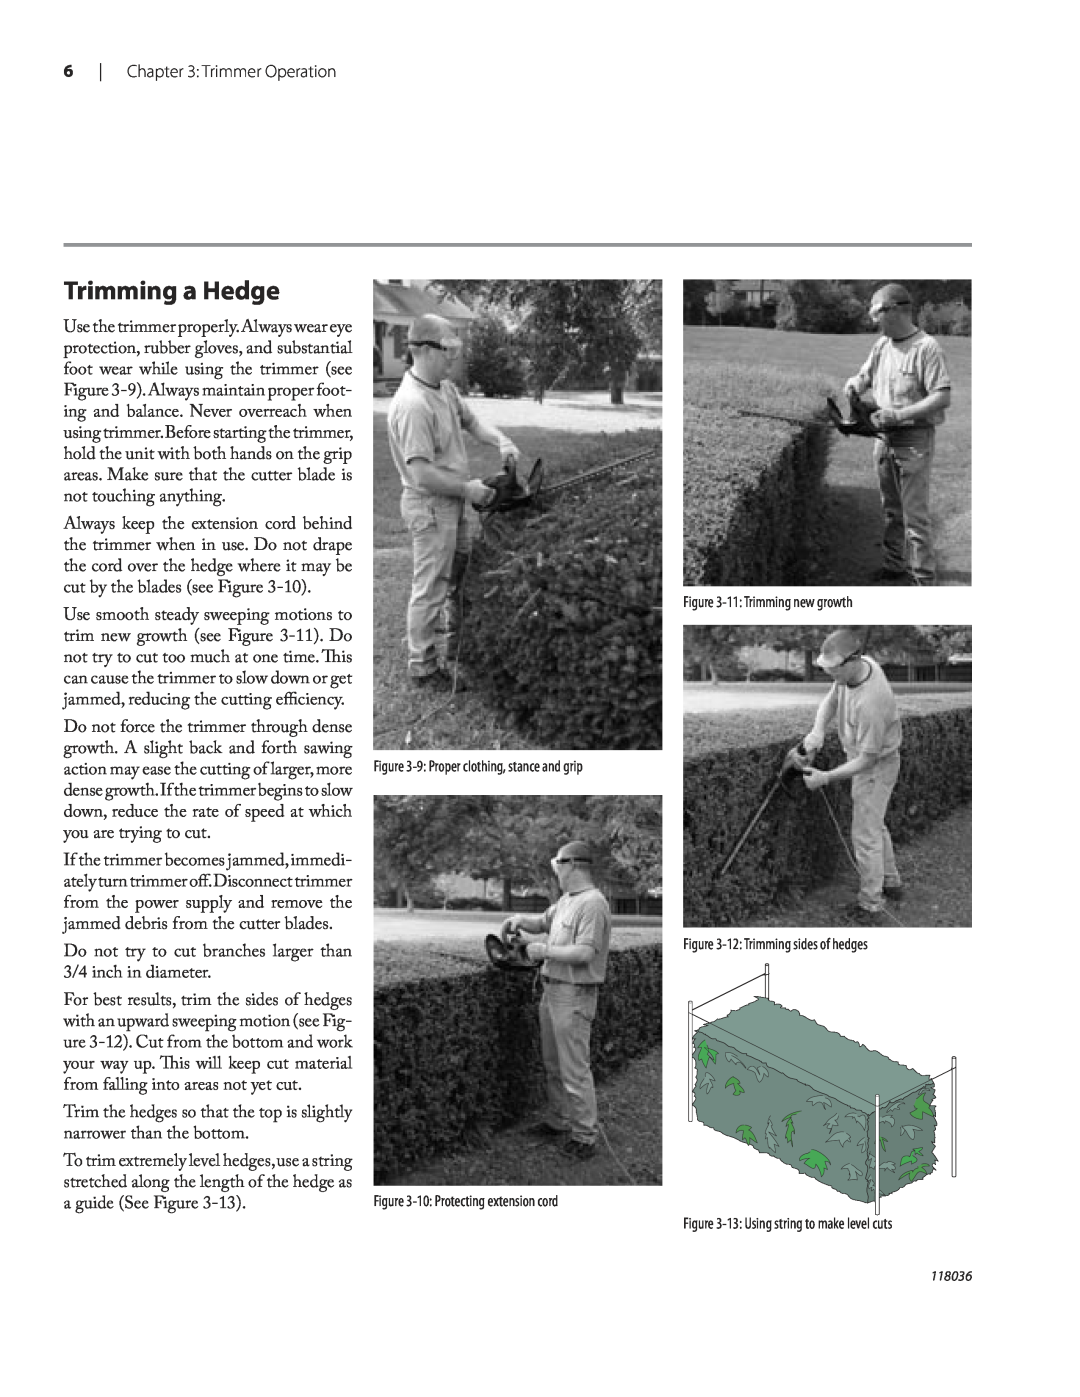 Remington HT3218A, HT4022A owner manual Trimming a Hedge 